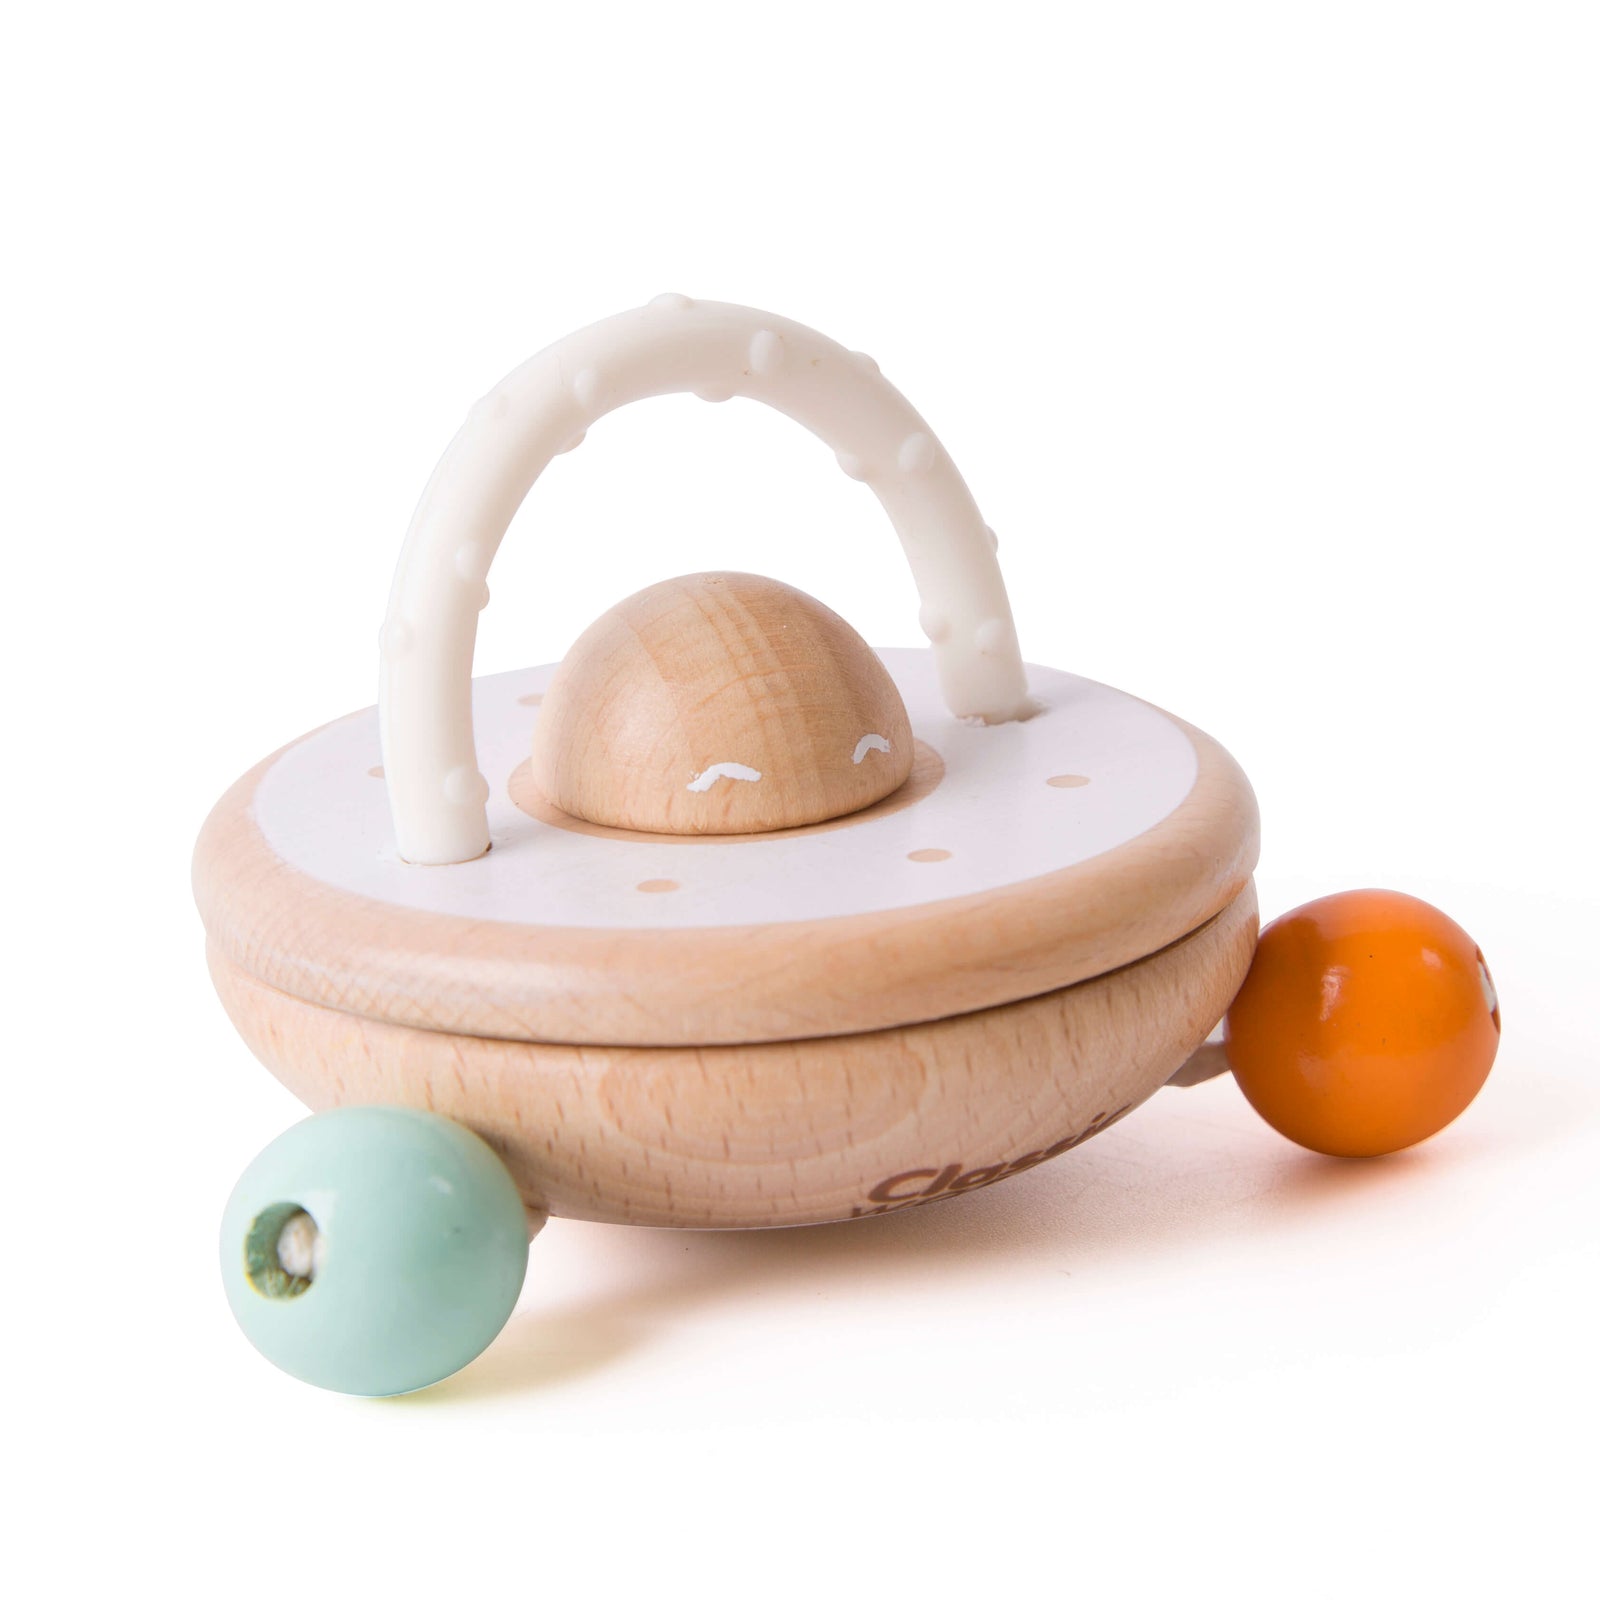 UFO Baby Rattle toys and Wooden Teether for babies of 6 months old